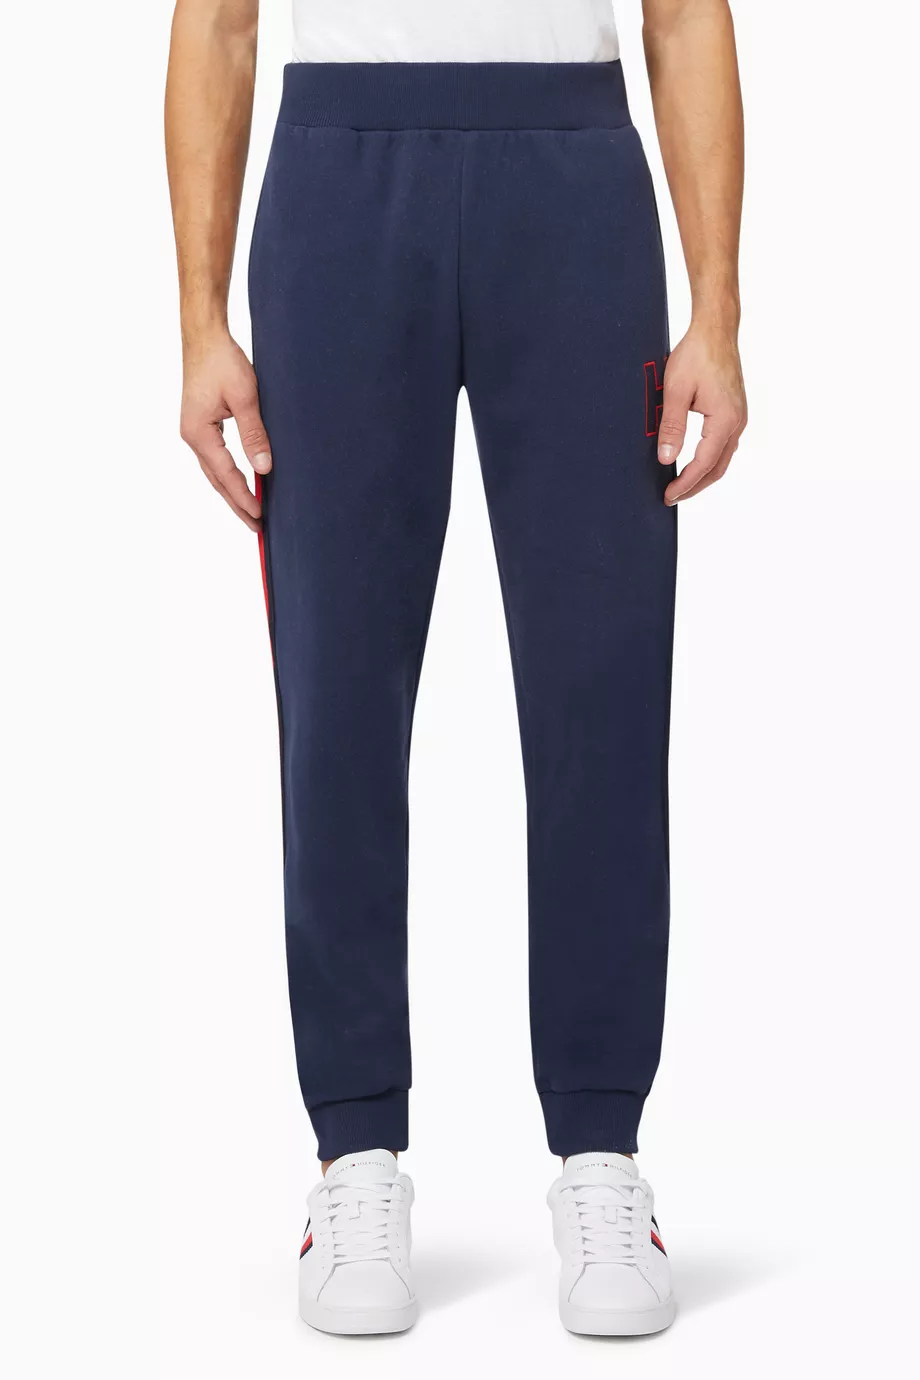 Tommy Hilfiger Lounge Signature Tape Jogger Pants in Recycled Cotton ...